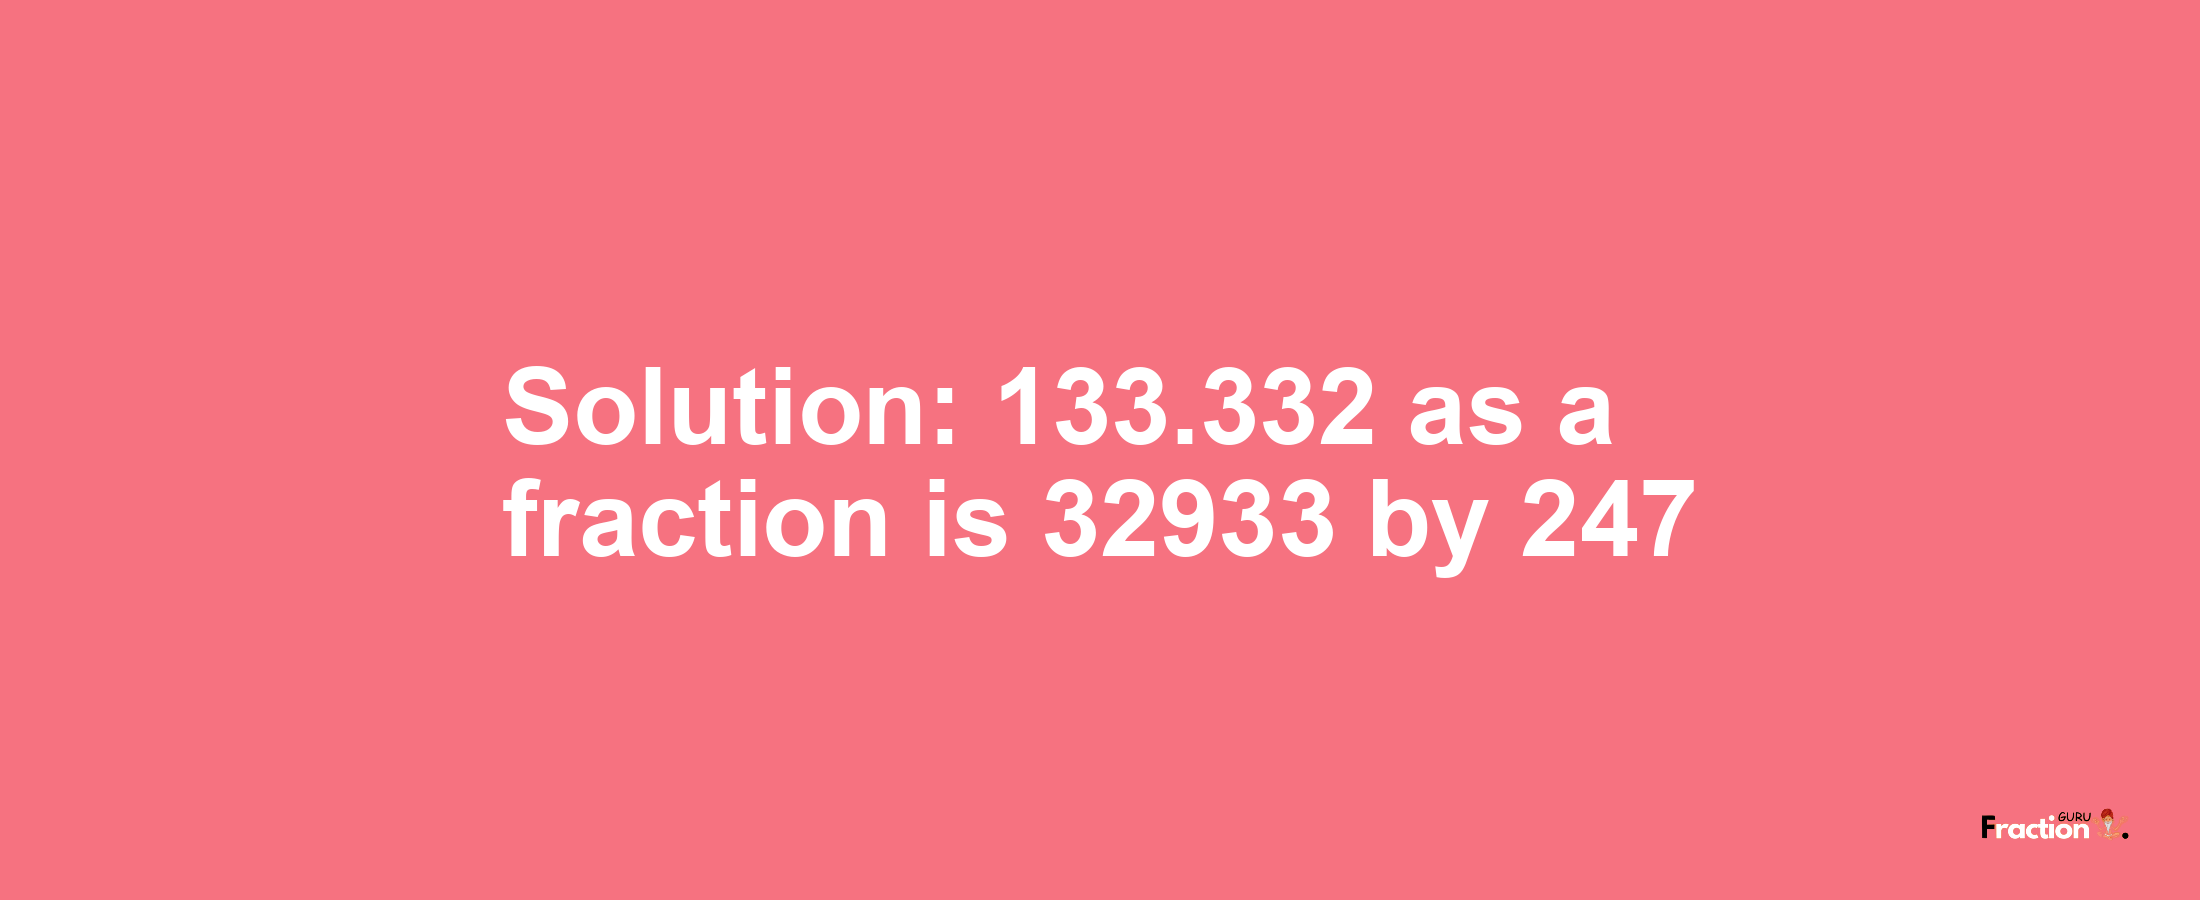 Solution:133.332 as a fraction is 32933/247